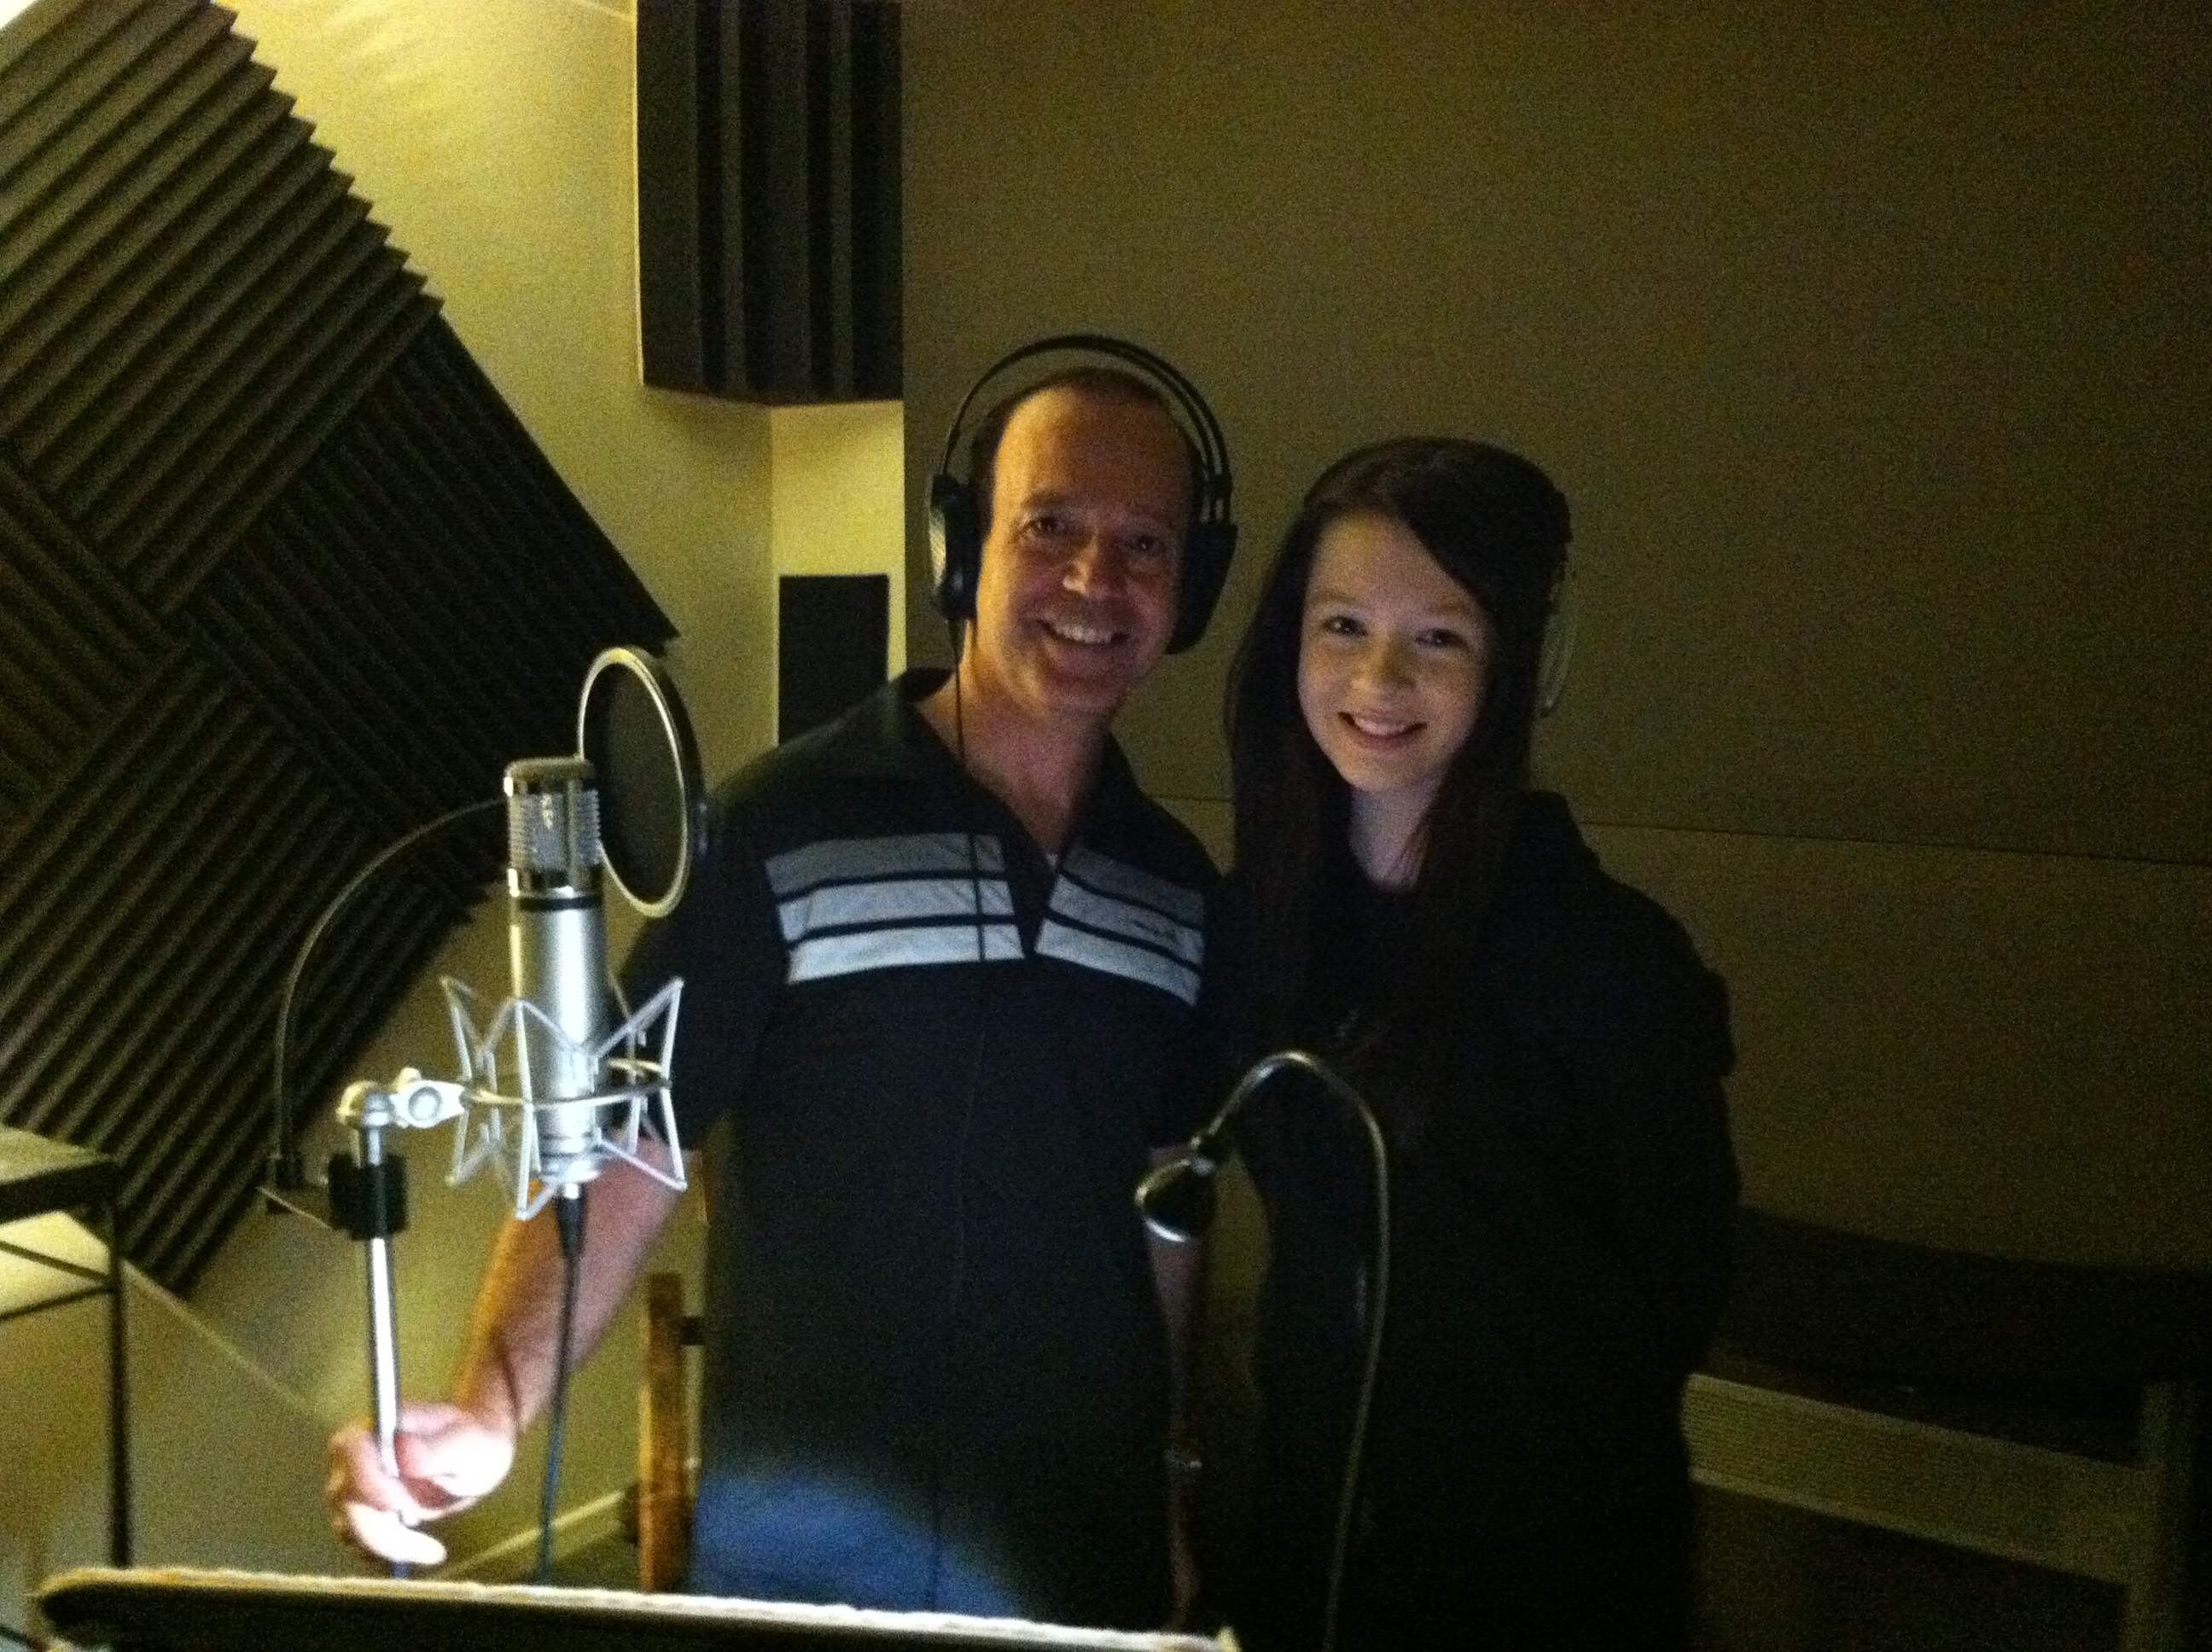 Mary-Jessica Pitts, in the booth with Kamal Aboukhater, the director of Fergus & Crispy. Mary-Jessica voices Teen Emily.